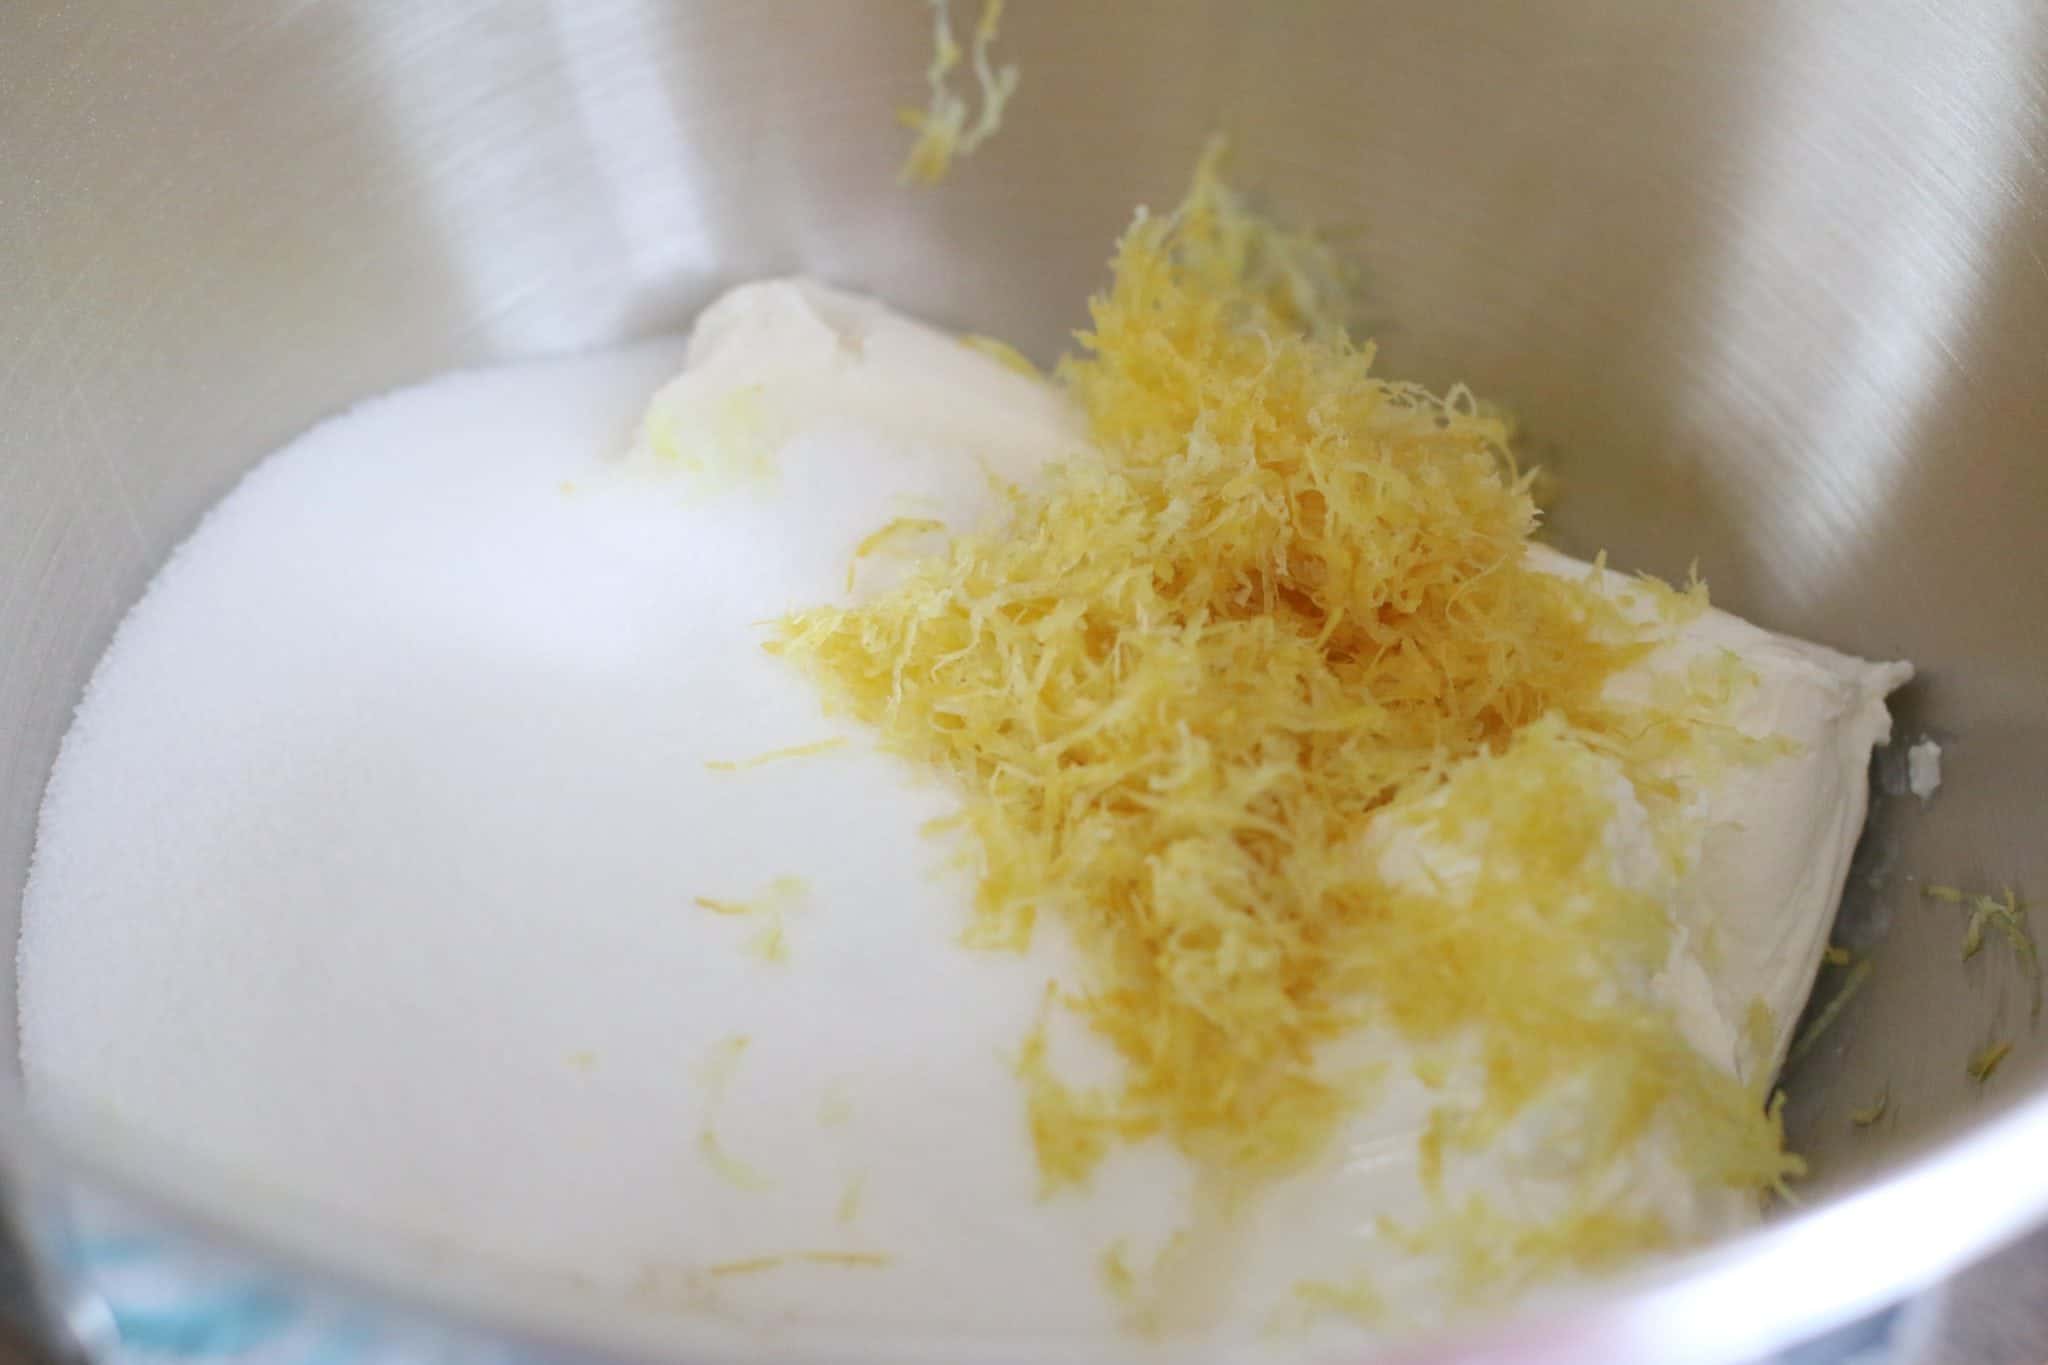 softened cream cheese, sugar, lemon zest in the bottom of a mixing bowl.